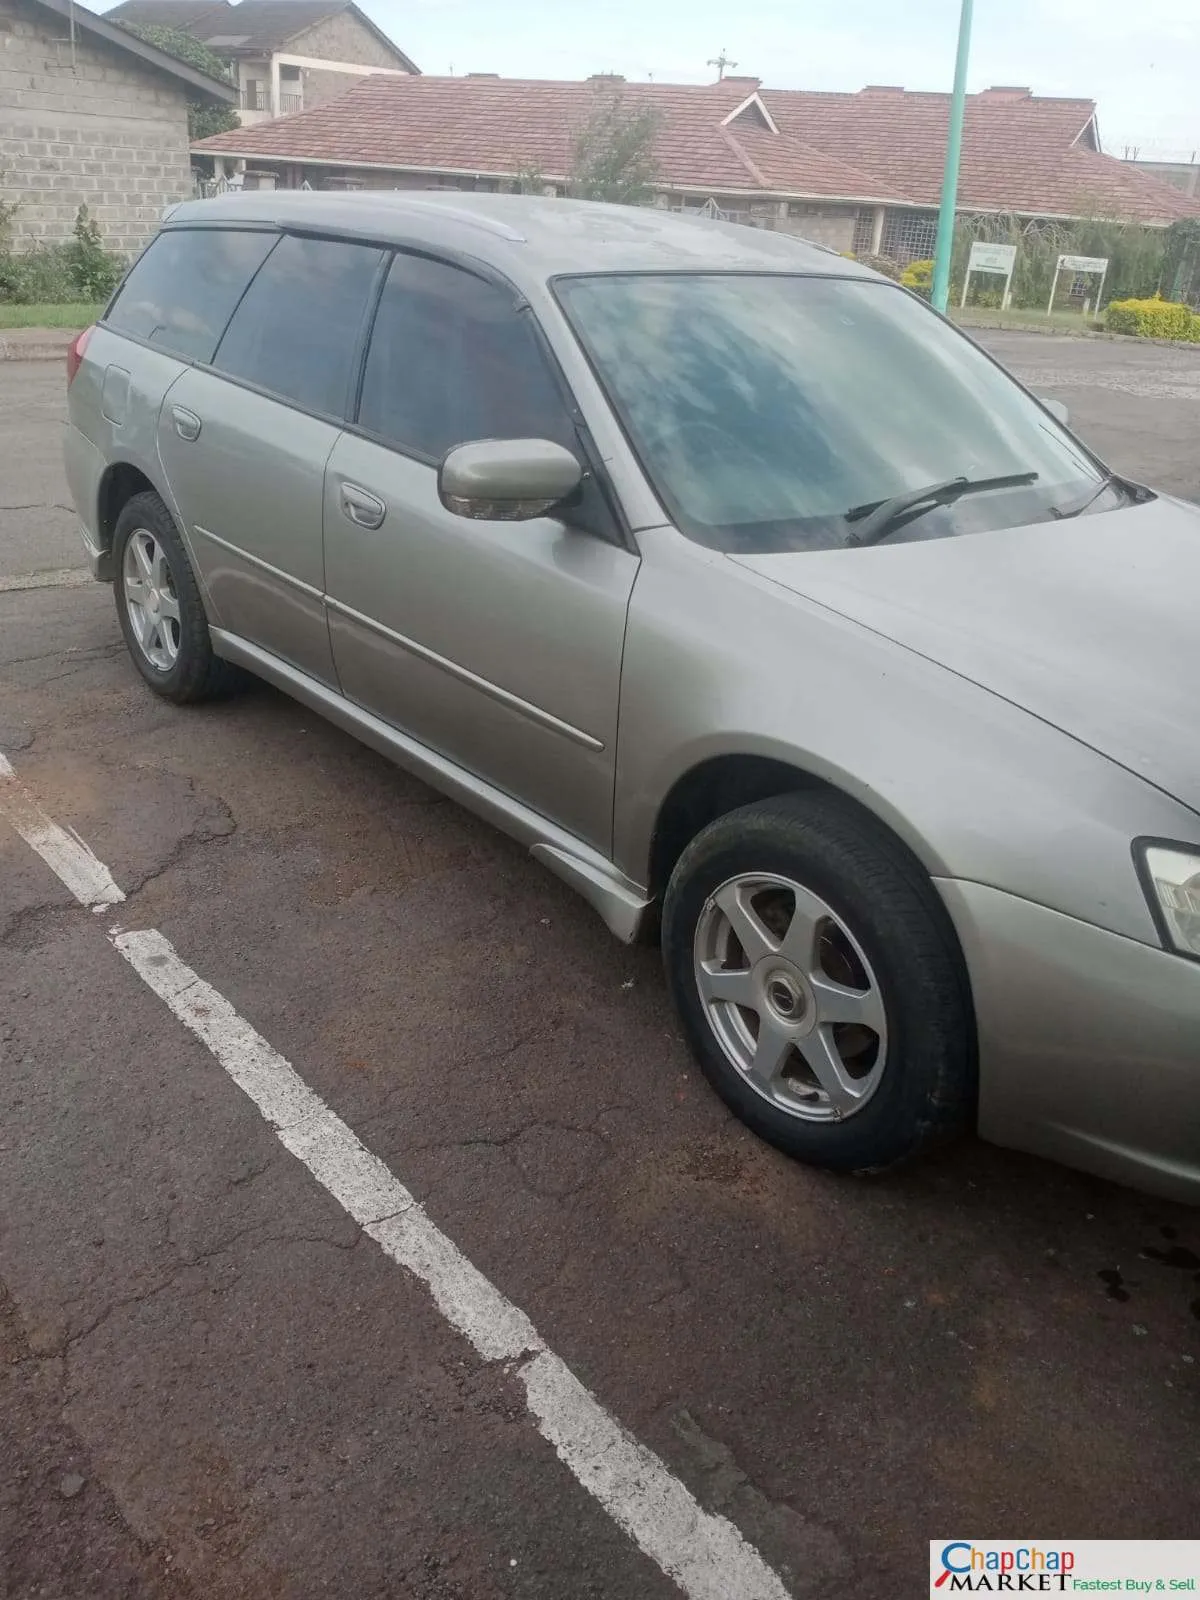 Subaru legacy for sale hire purchase installments You Only pay 40% Deposit Trade in Ok EXCLUSIVE